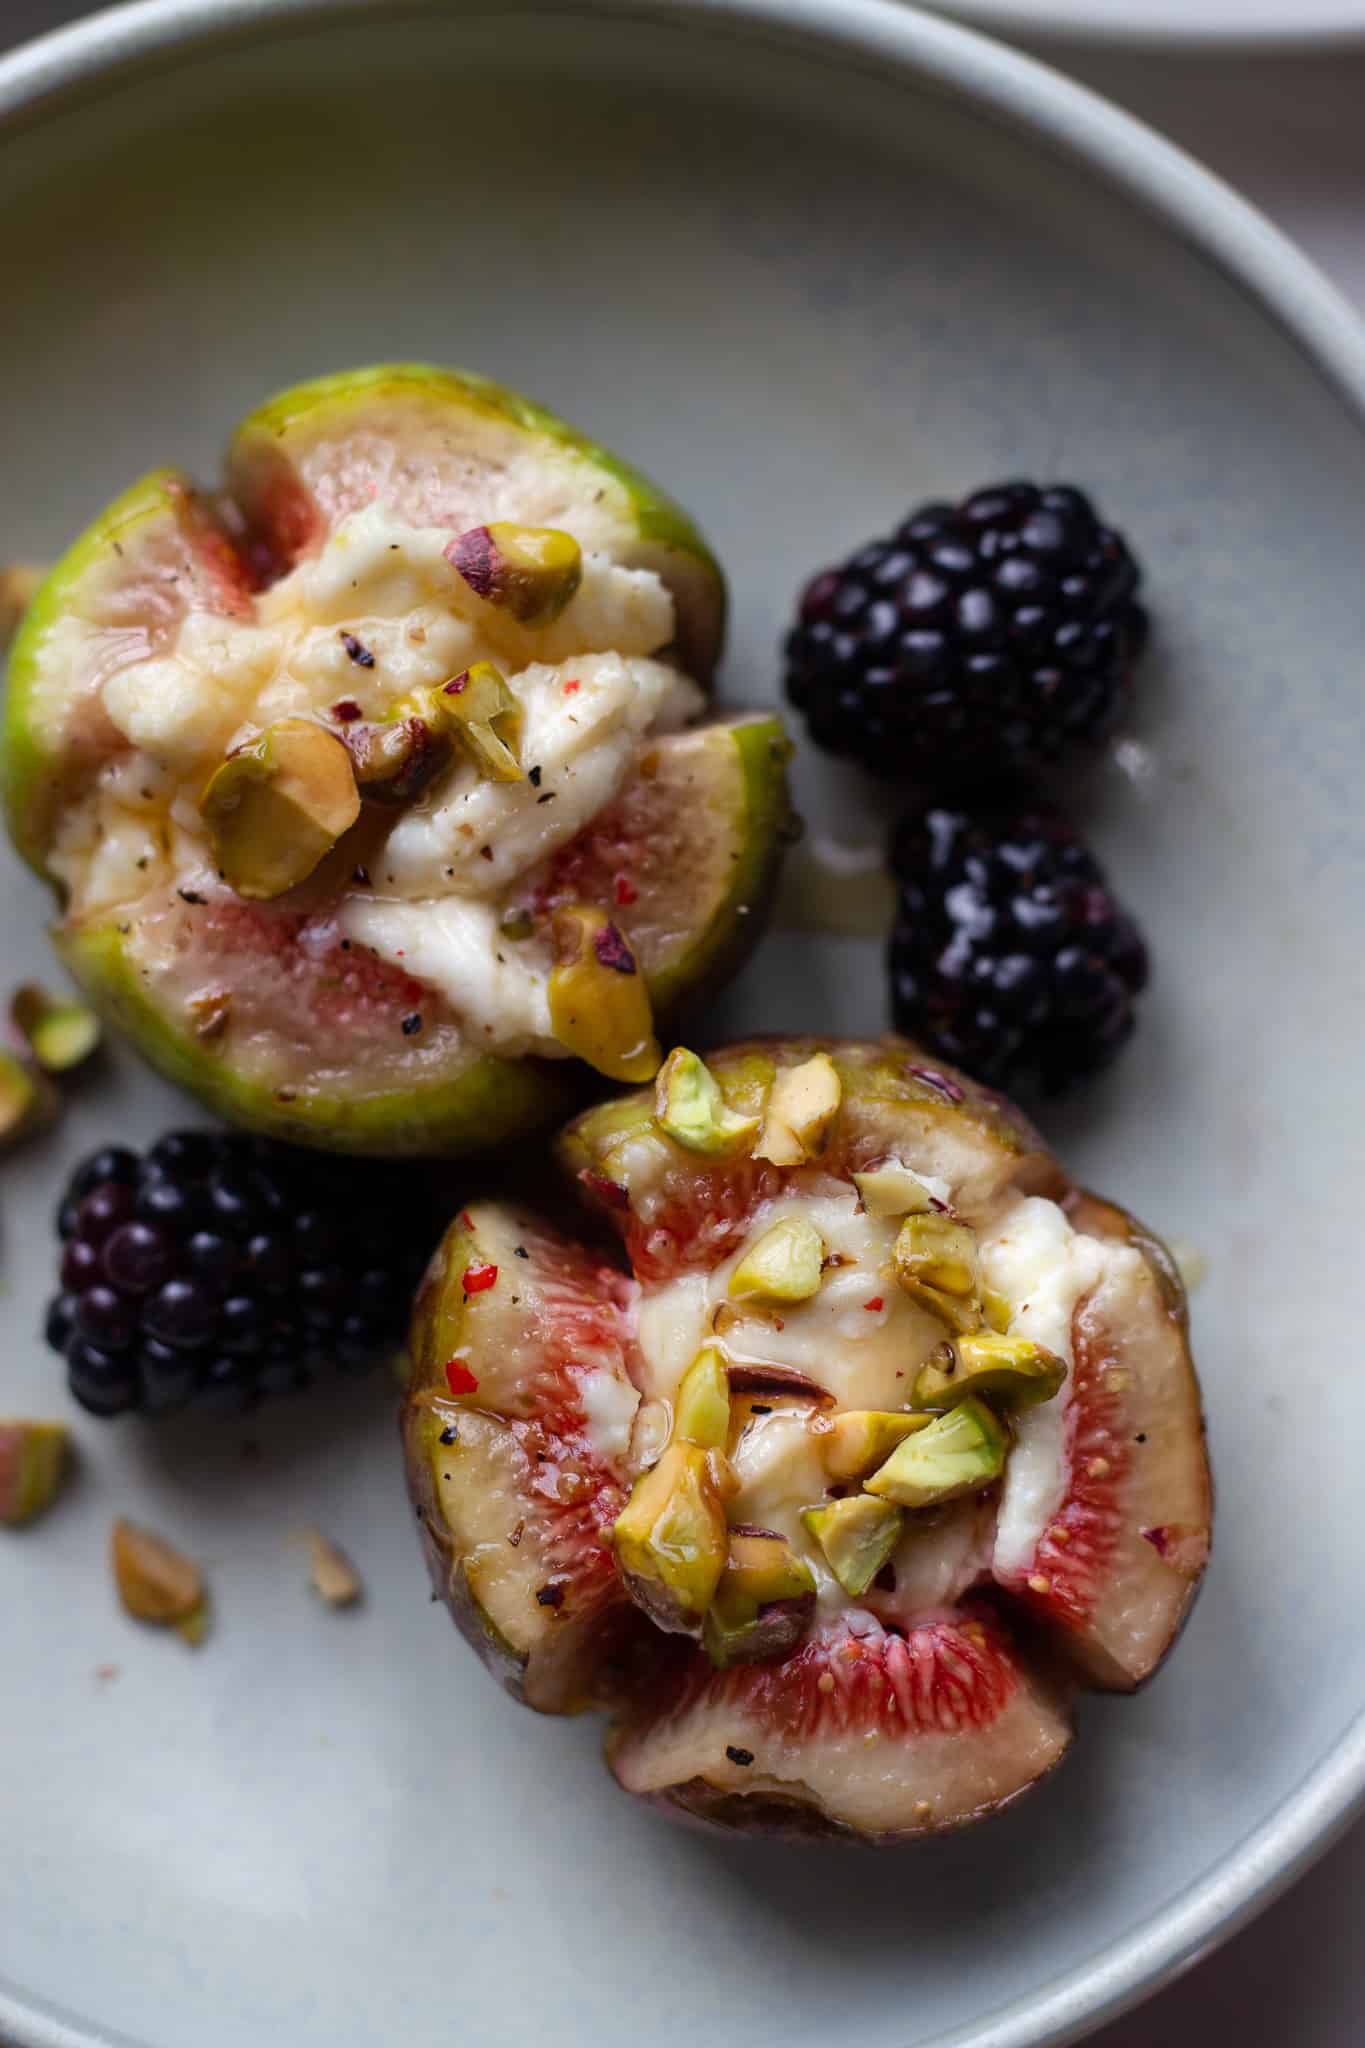 Roasted Figs stuffed with goat cheese and drizzled with honey and pistachios.